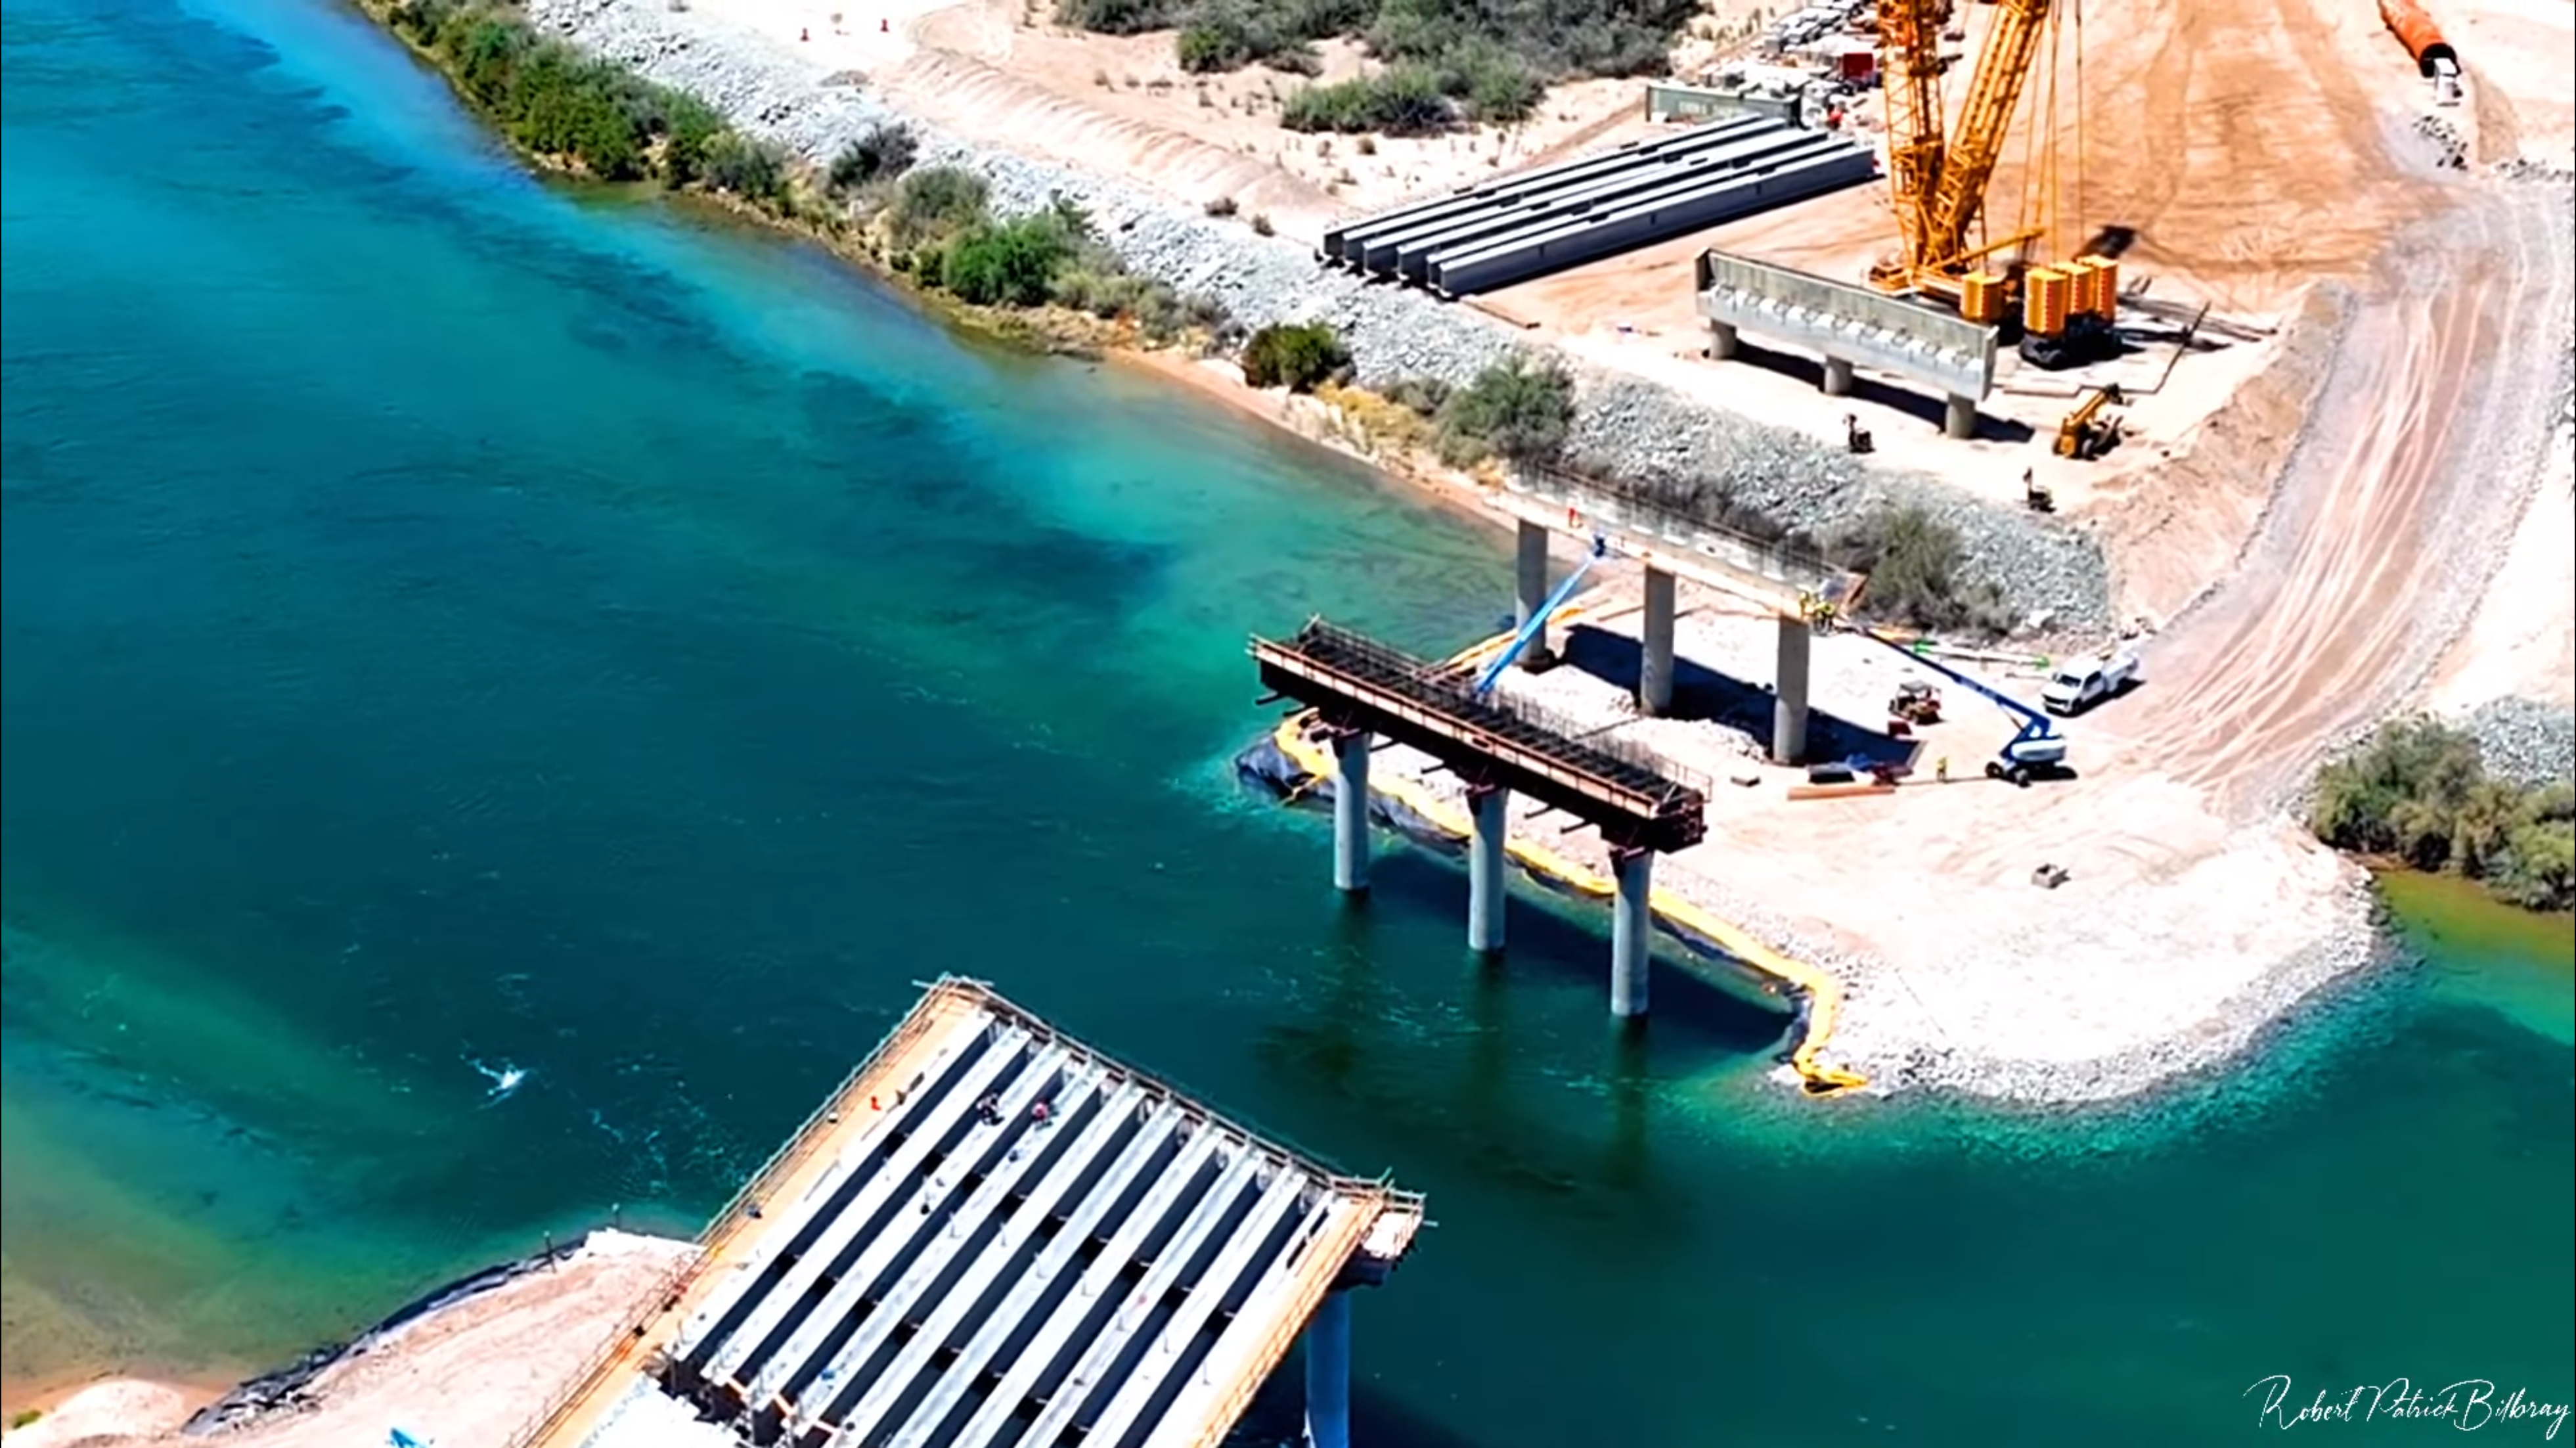 Aerial view of the Laughlin-Bullhead City Bridge Project under construction. In the foreground, cranes and some pilons can be seen. The Colorado River flows beneath the bridge, with the desert landscape in the background.